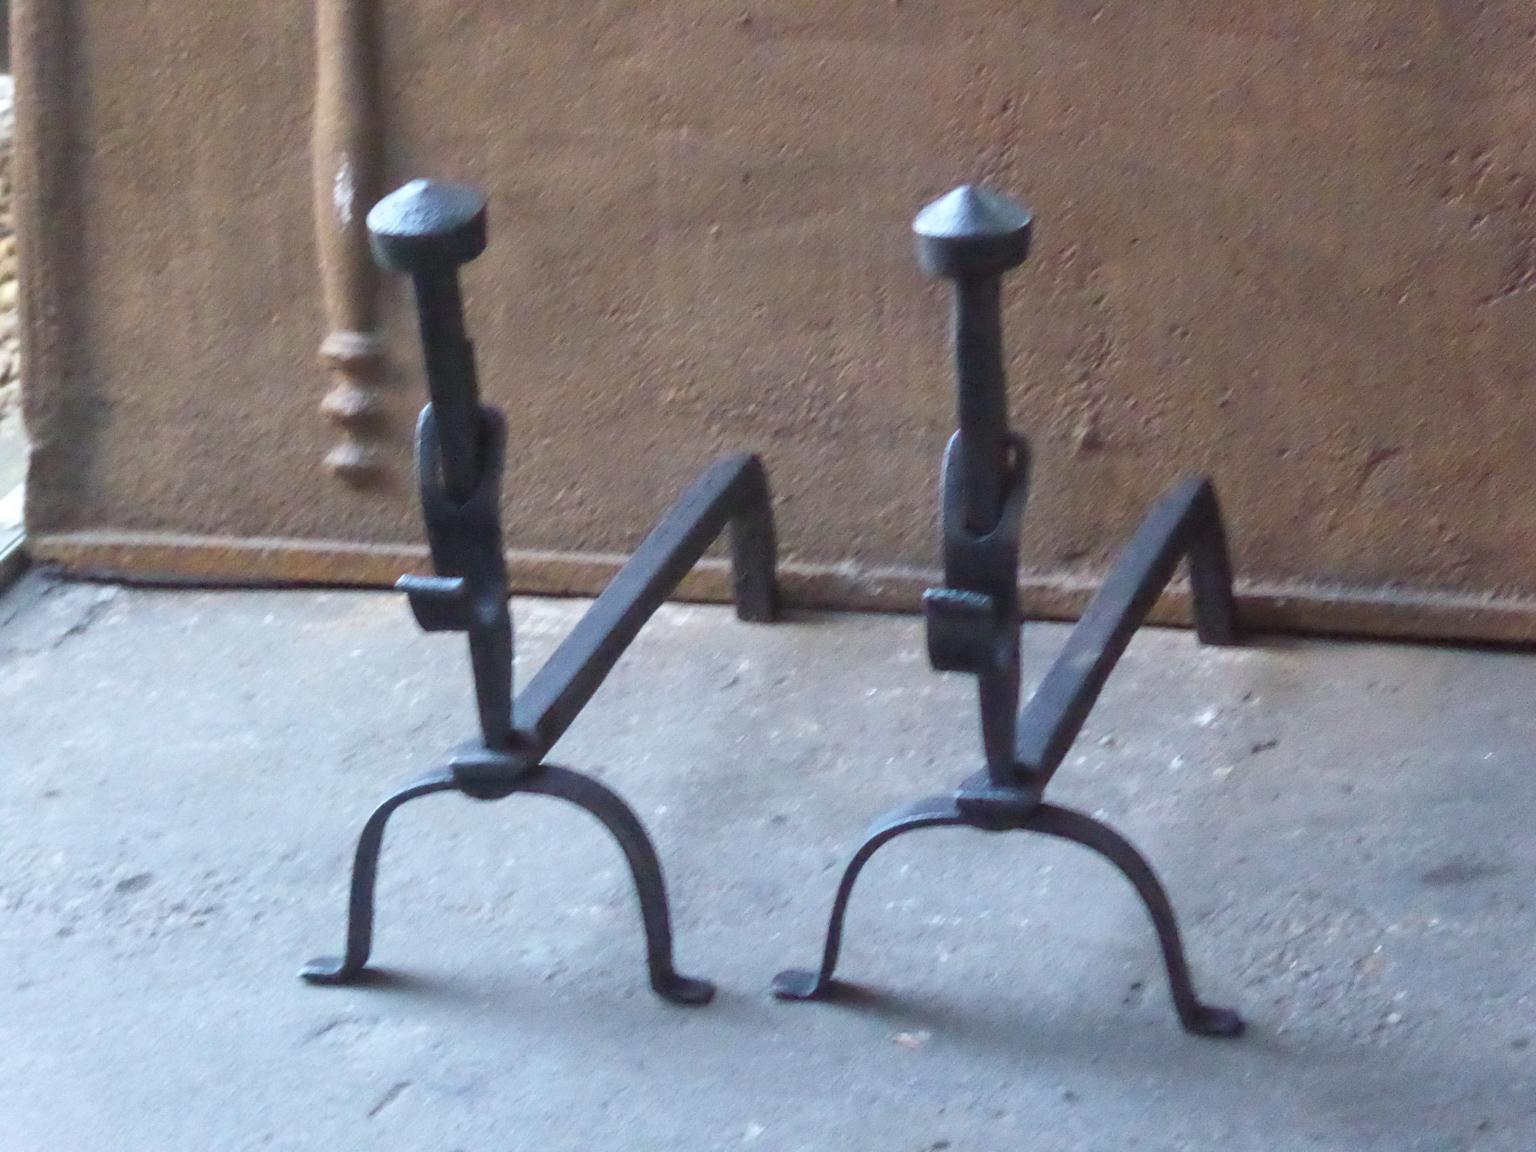 19th century French Napoleon III andirons made of wrought iron. The andirons have spit hooks to grill food. 

The andirons have a black / pewter patina. The andirons are in a good condition.